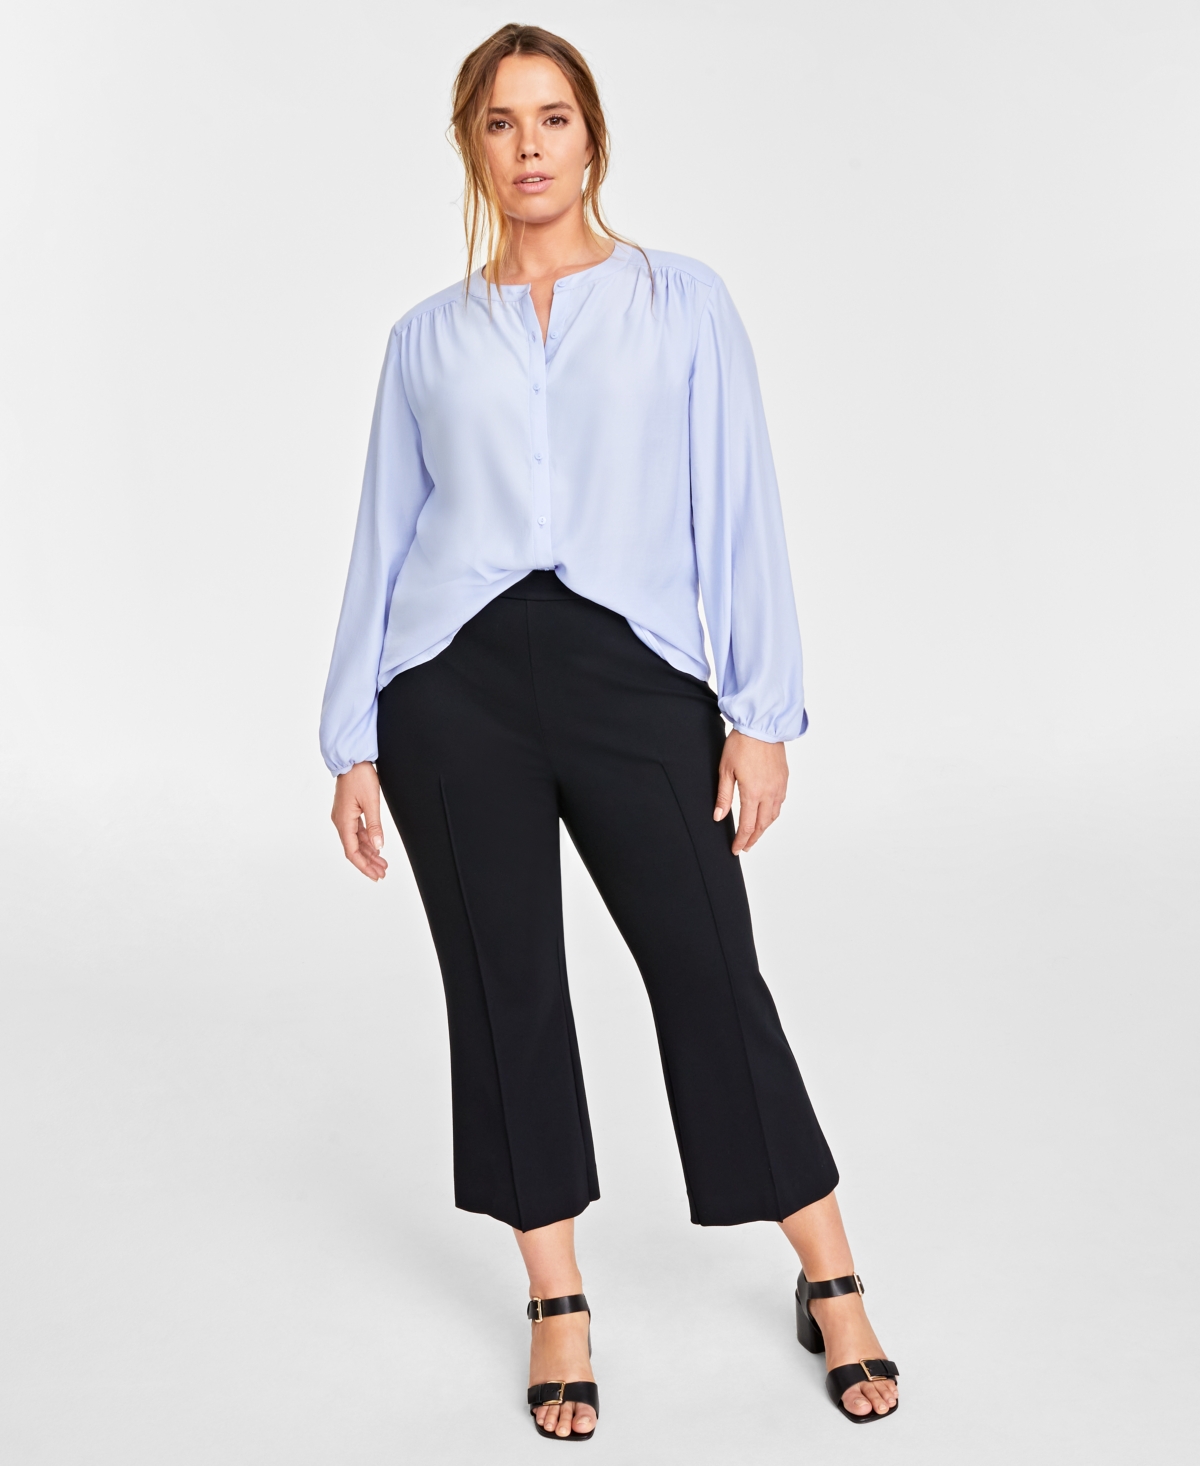 ON 34TH PLUS SIZE SATIN BUTTON-FRONT SHIRT, CREATED FOR MACY'S